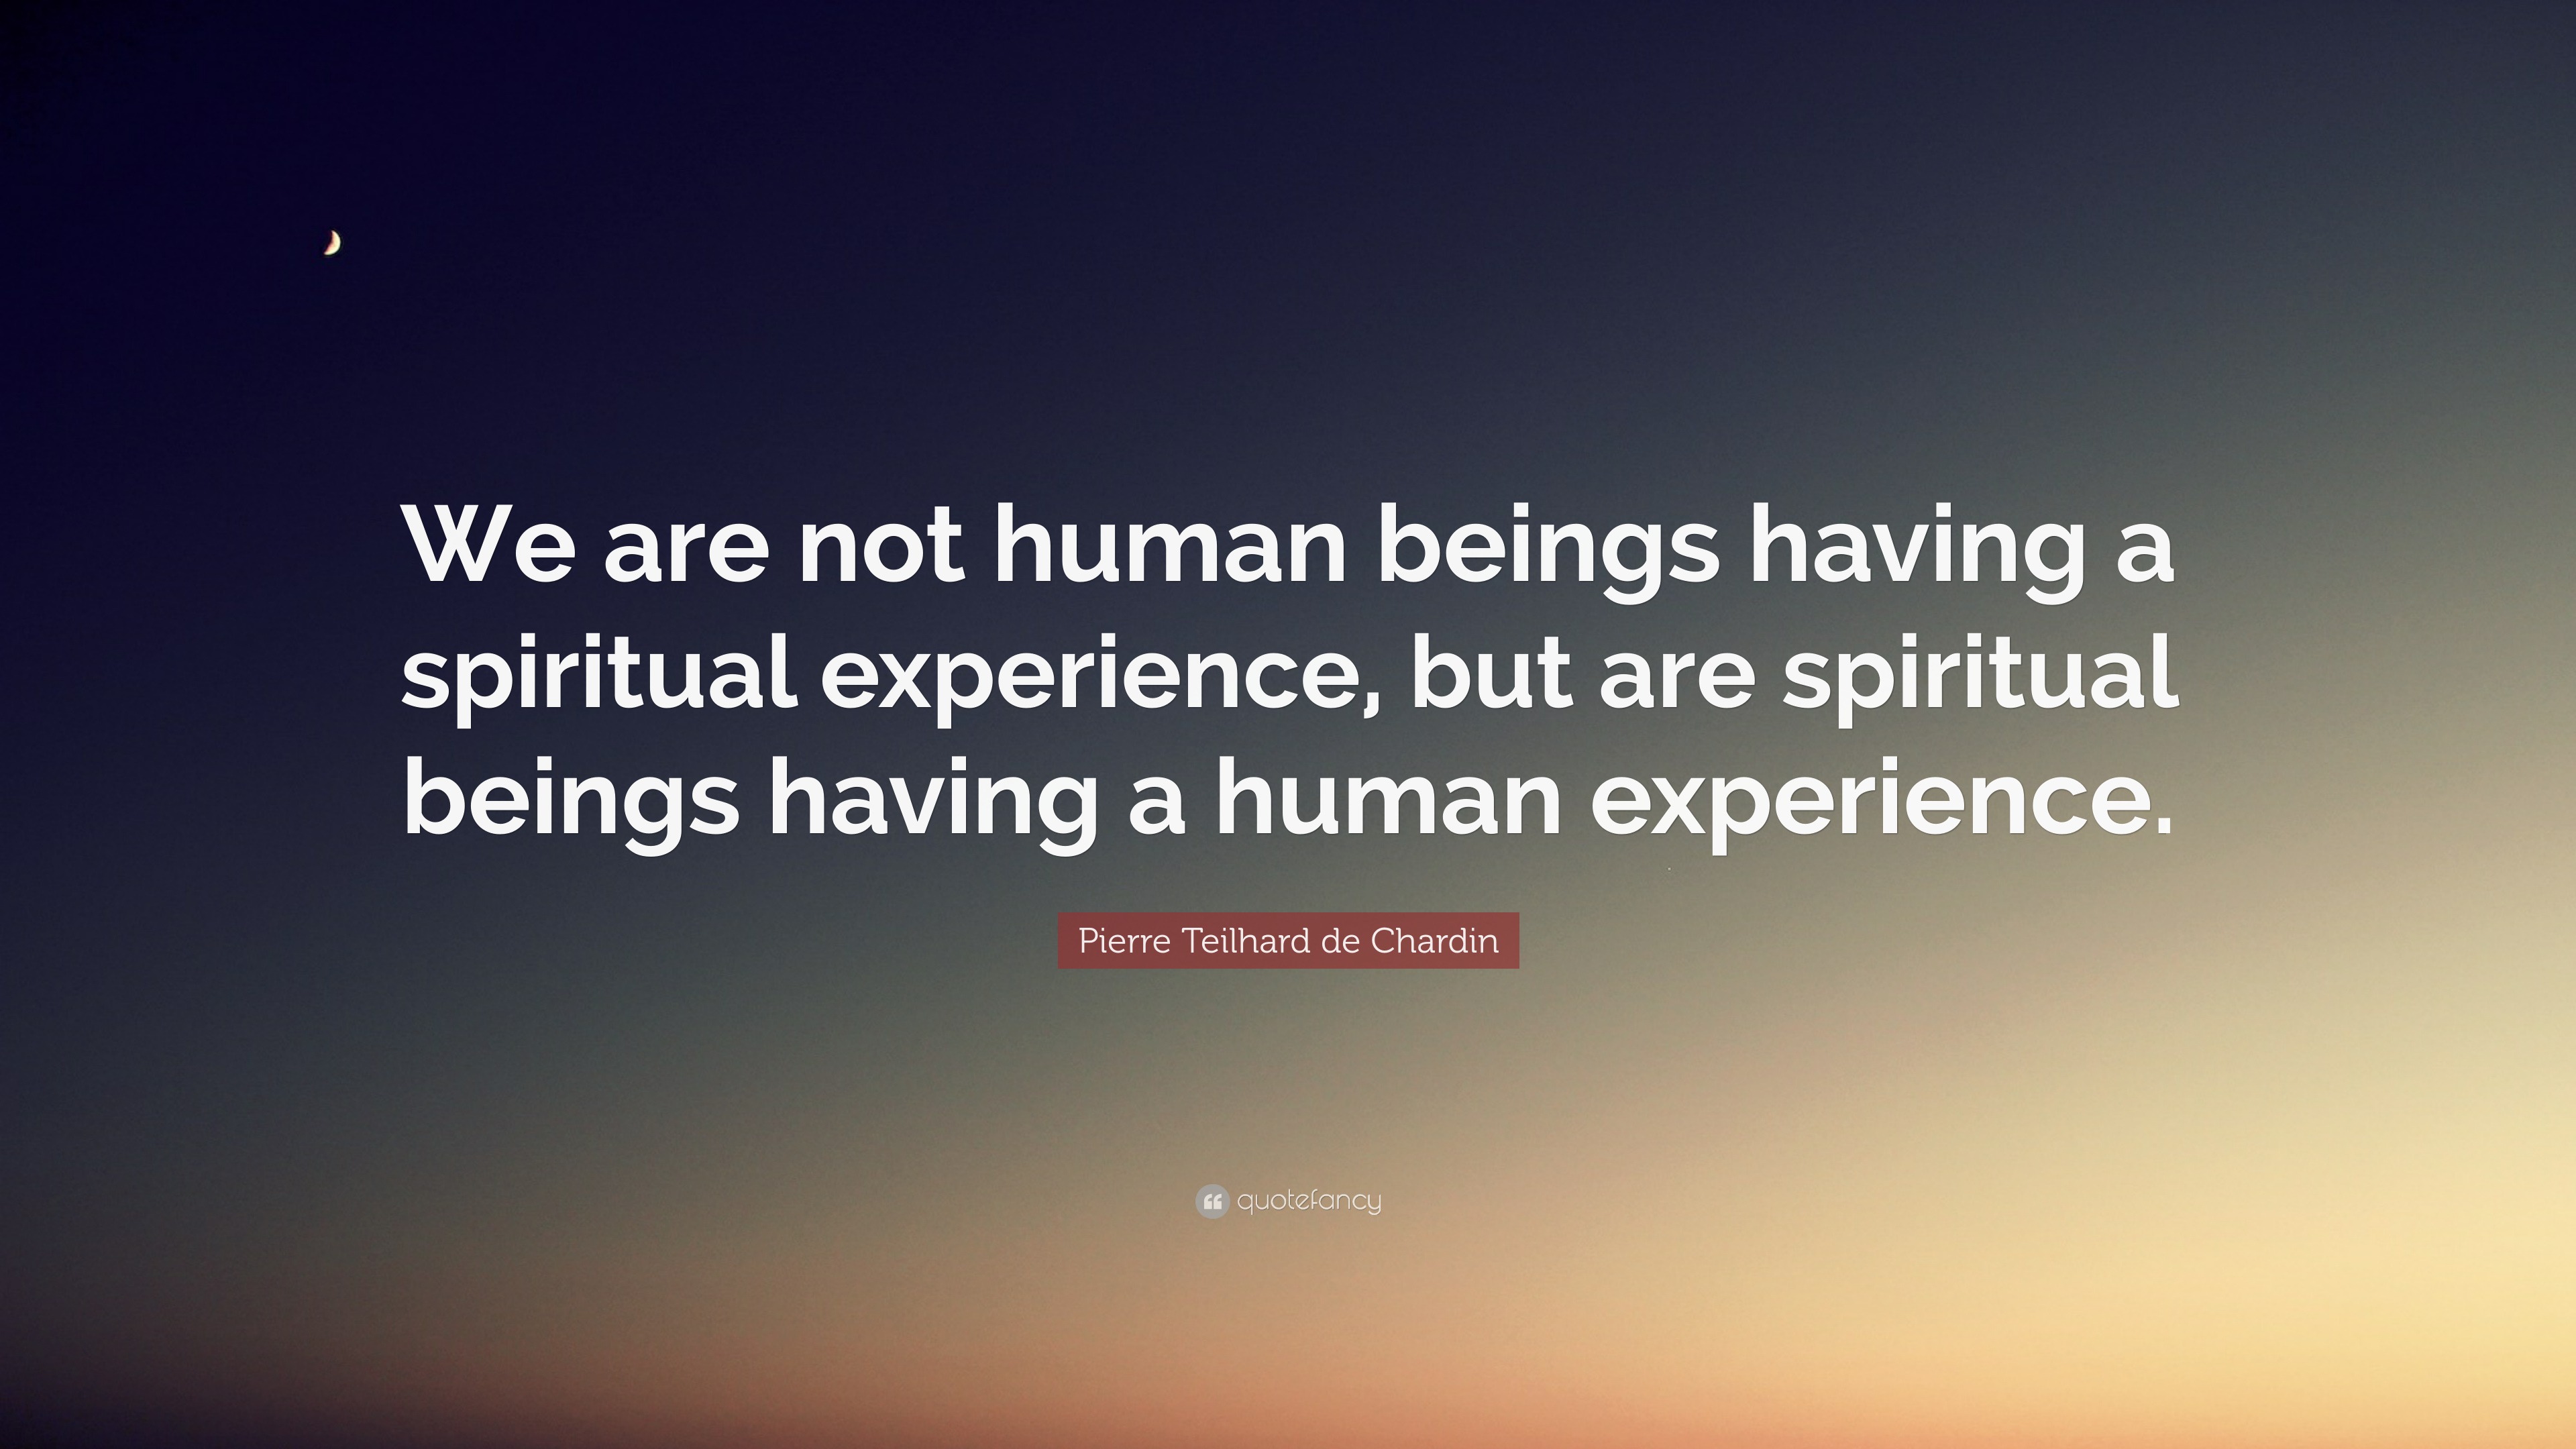 we are not human beings experiencing